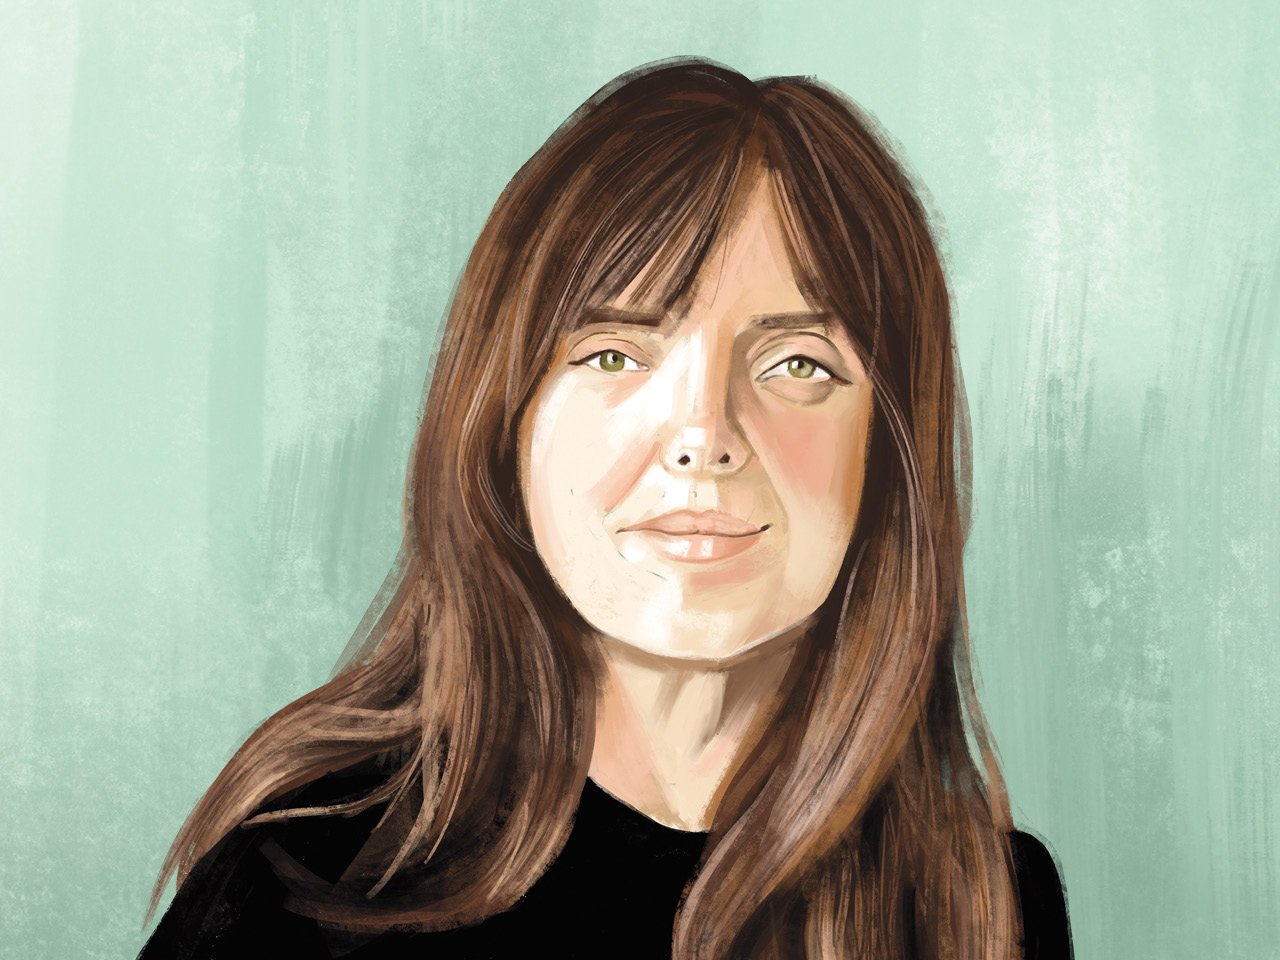 An illustration of documentarian Phylis Ellis on a turquoise background